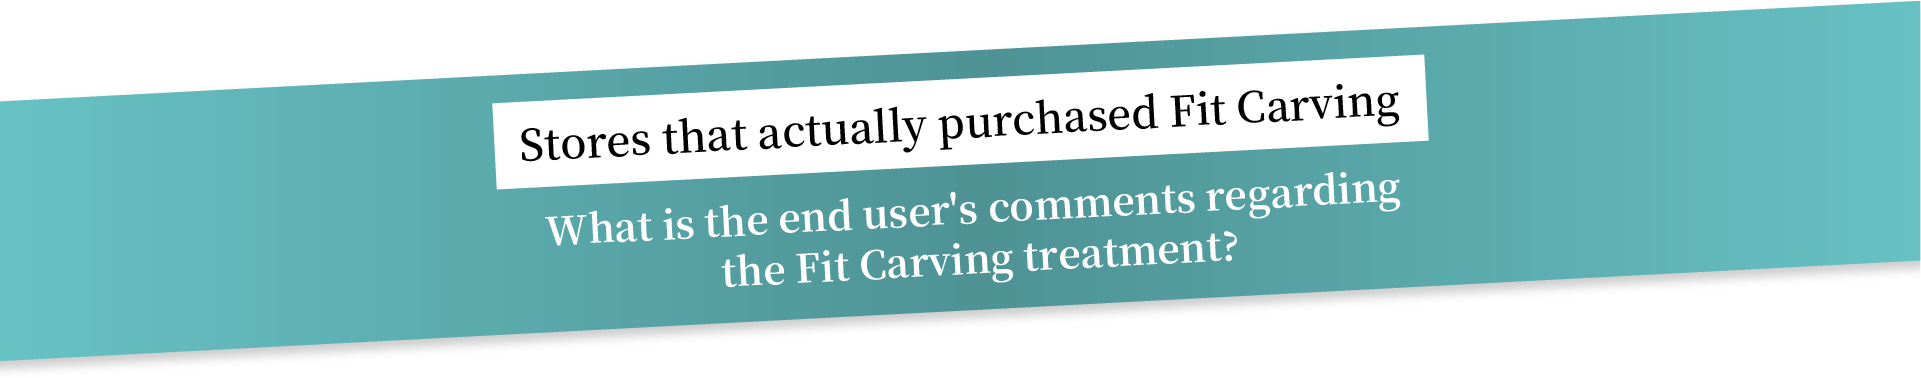 Stores that actually purchased Fit Carving What is the end user's comments regarding the Fit Carving treatment?